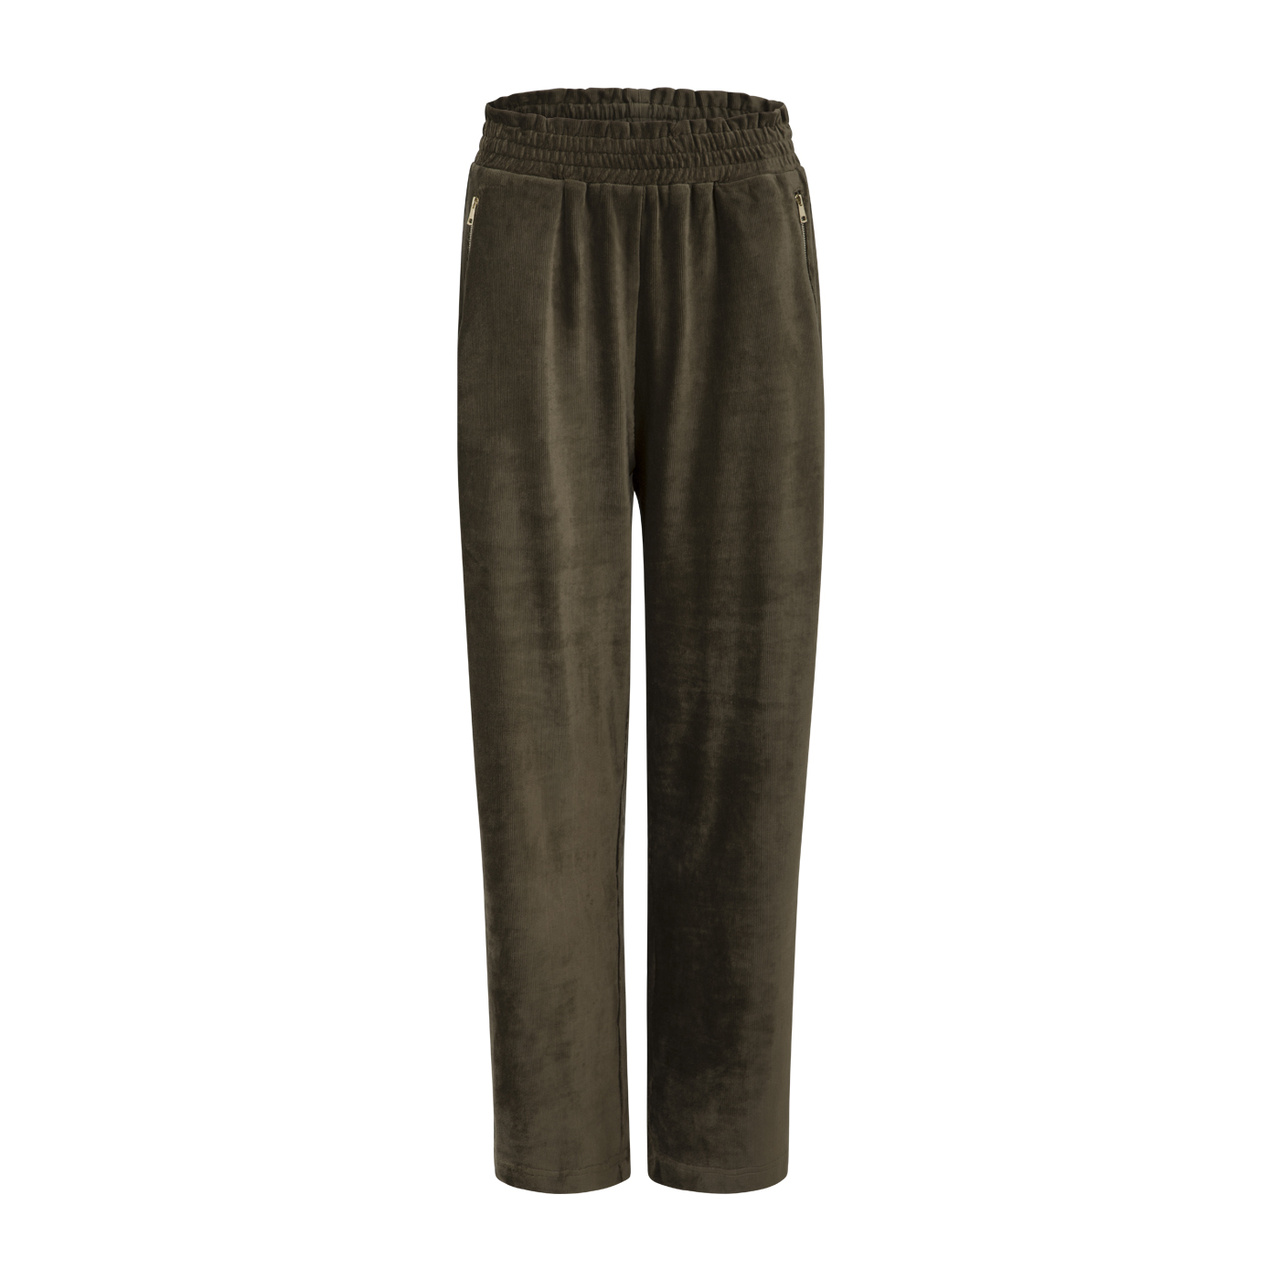 Relaxed pants in soft Curduroy 40